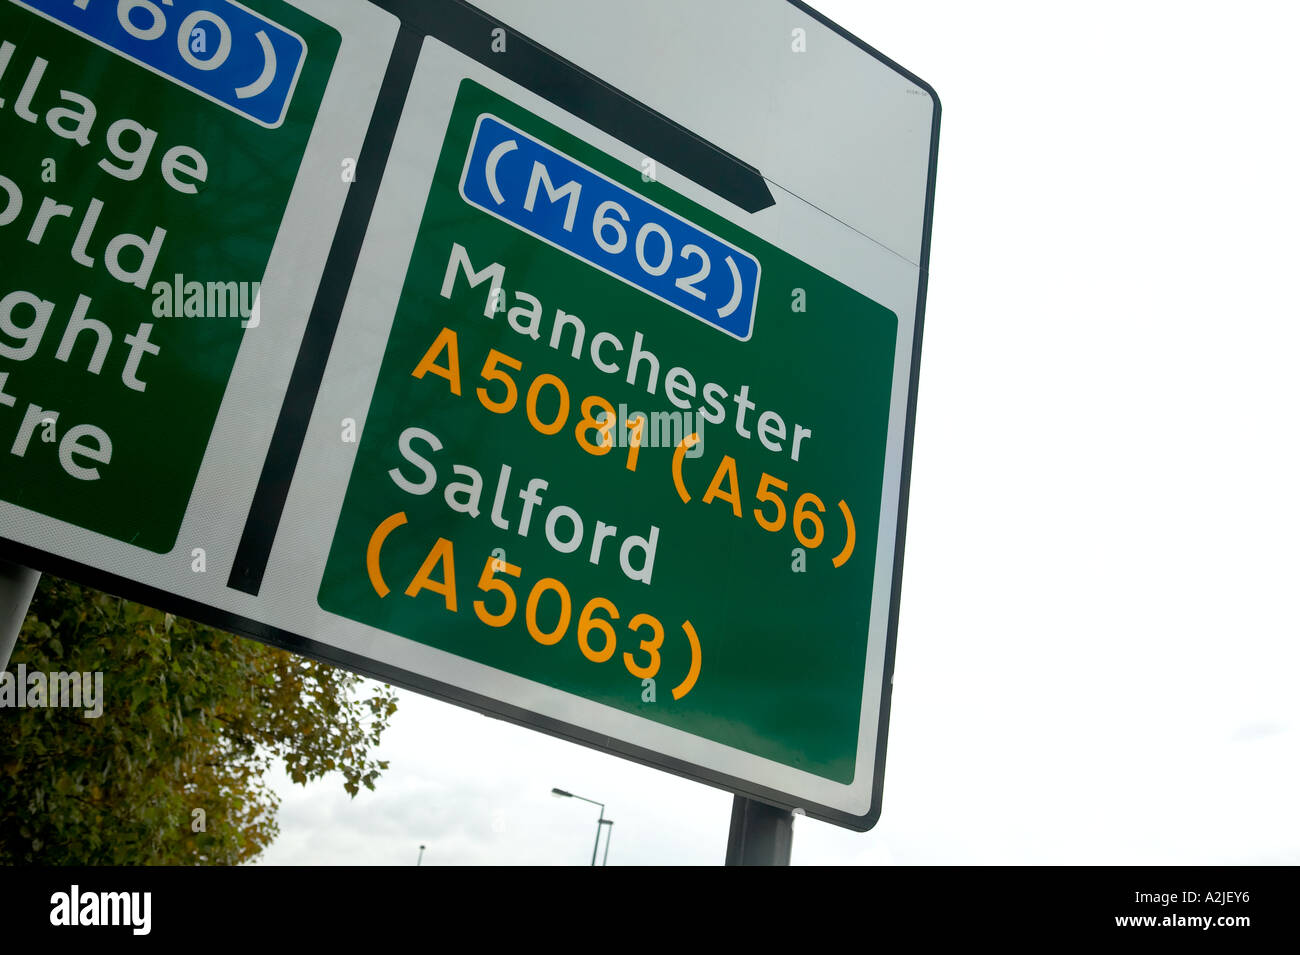 A street sign in central Manchester pointing to the M602 and Salford. Stock Photo